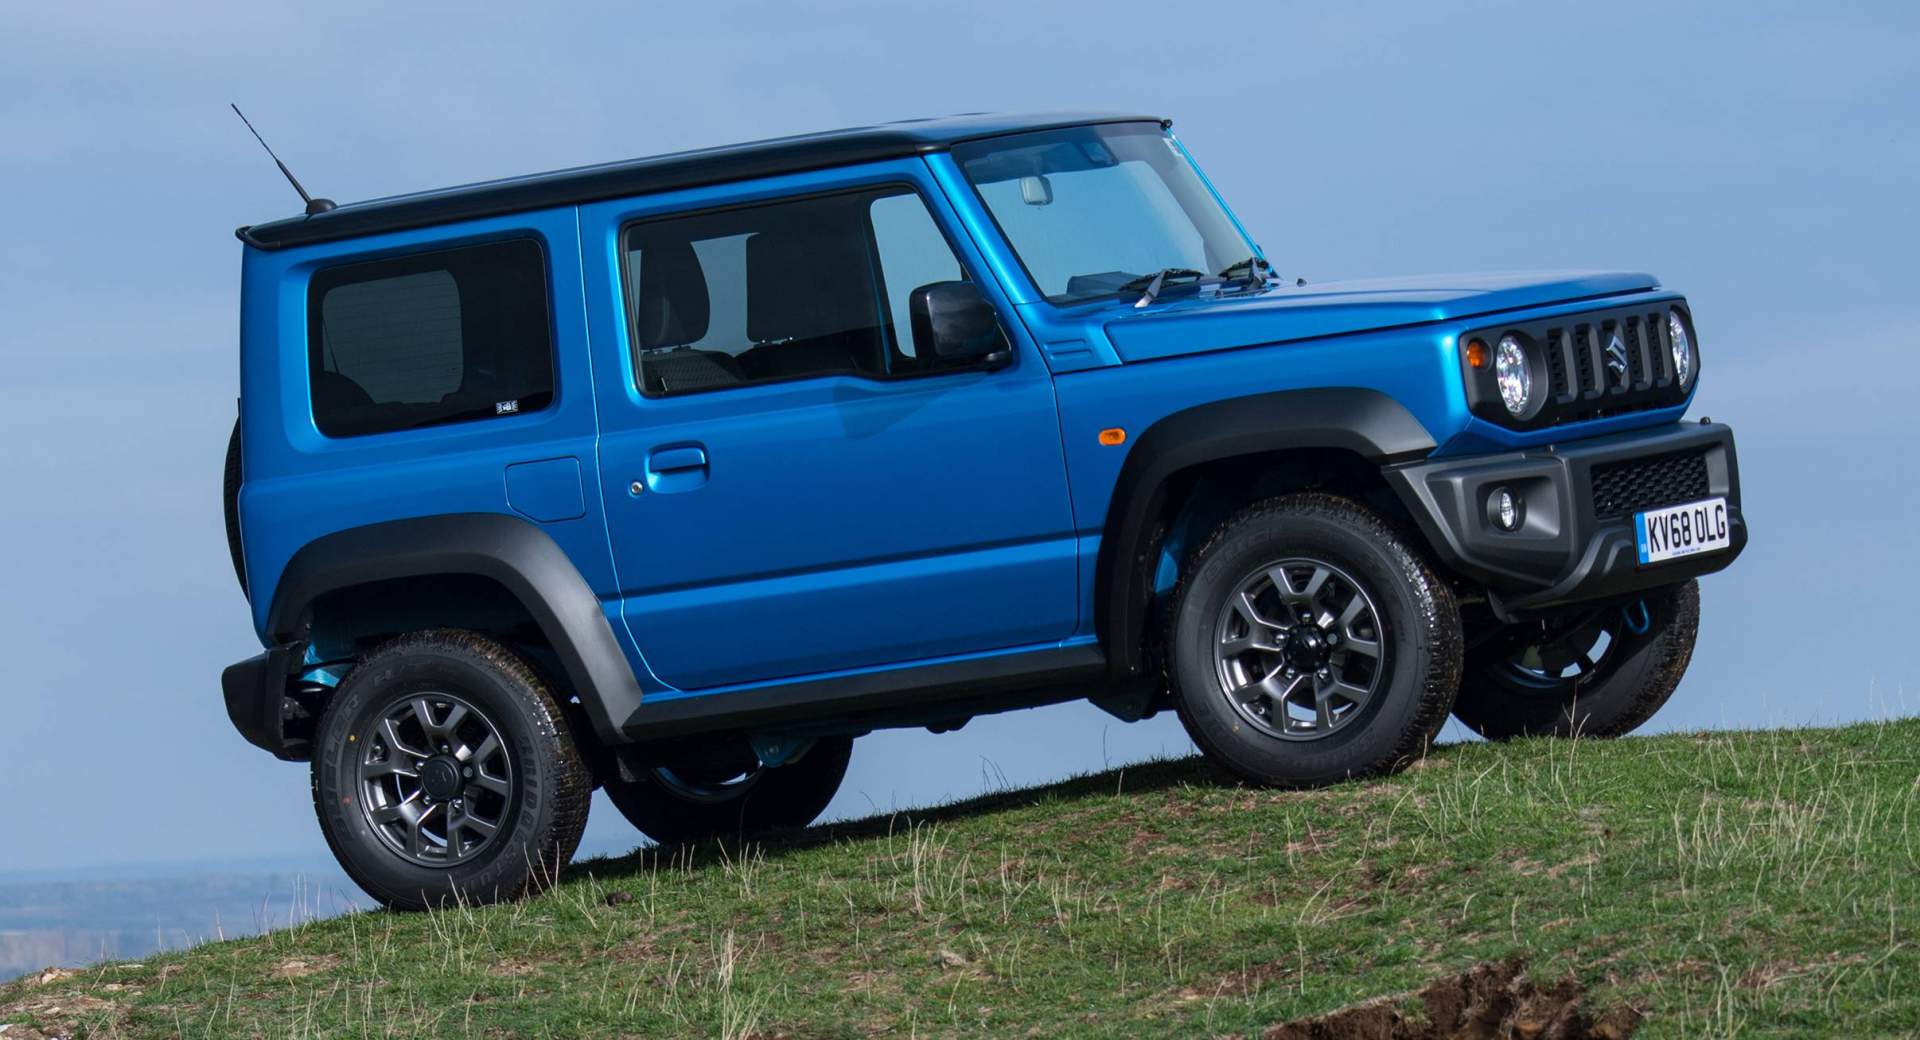 The Suzuki Jimny will stay on sale, for now